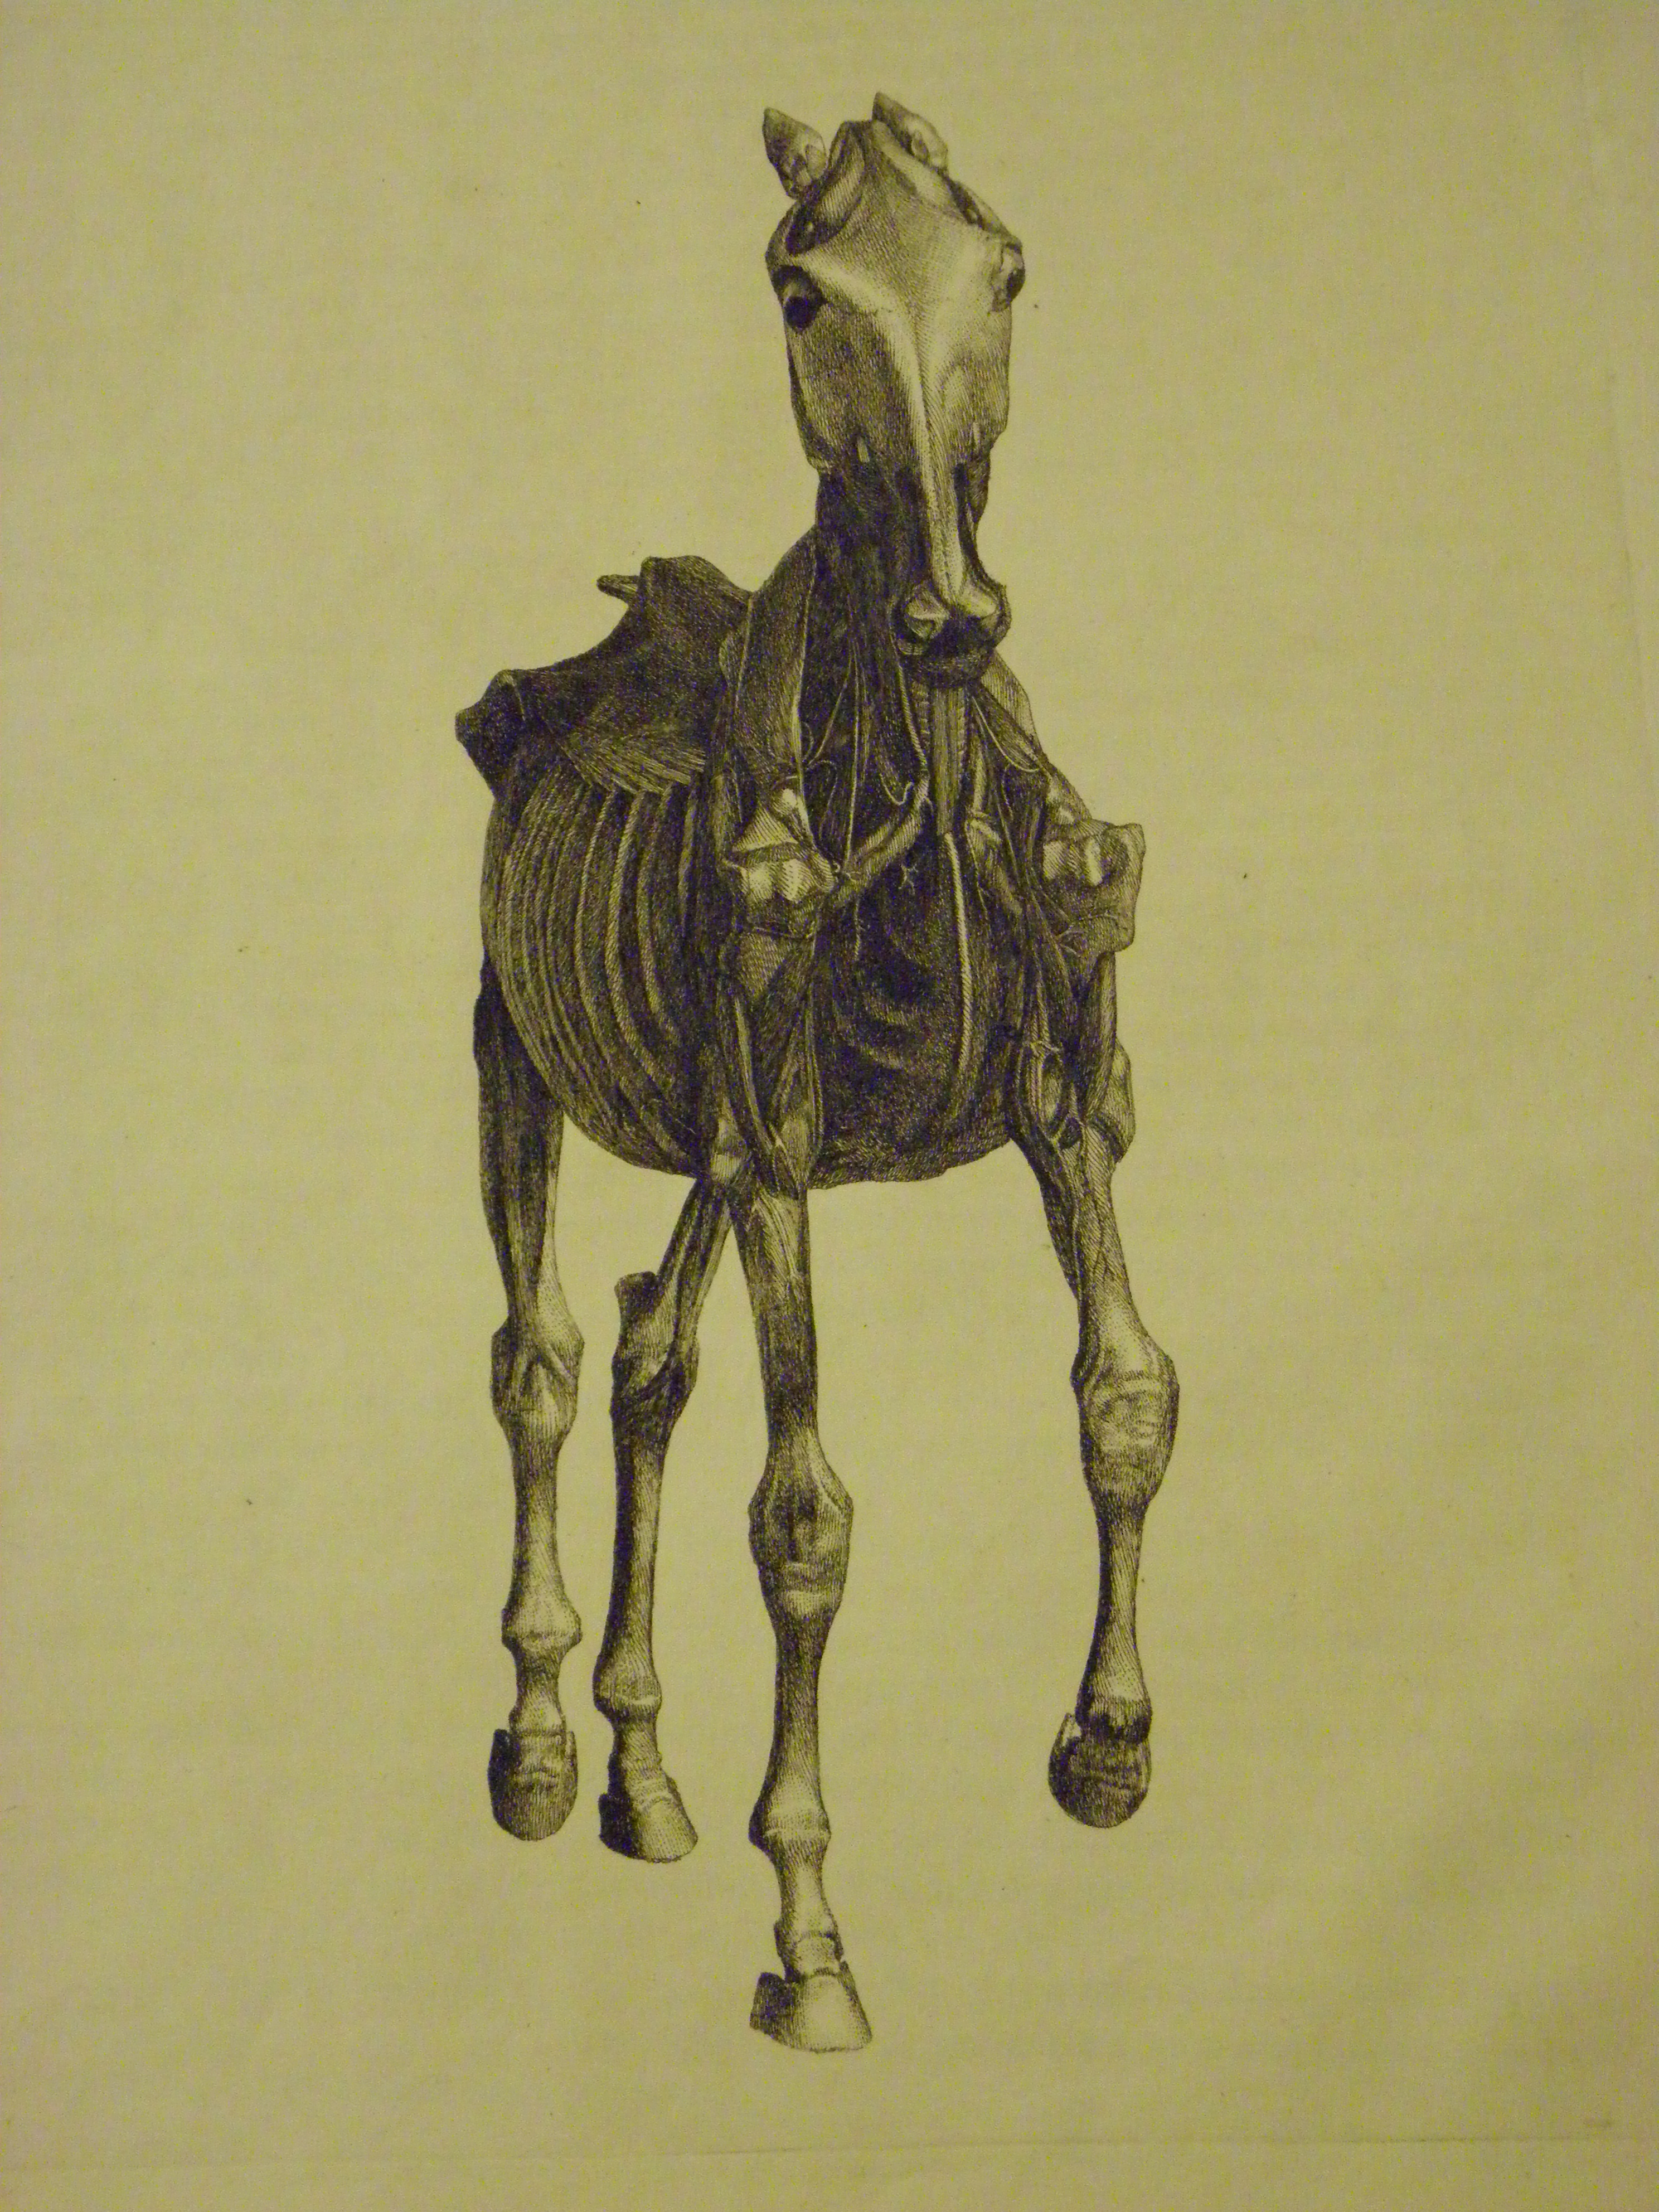 This is the first edition of The anatomy of the horse: Including a particular description of the bones, cartilages, muscles, fascias, ligaments, nerves, arteries, veins and glands (1766) by George Stubbs, painter. Scott Fund SF 765 .S8 1766. Marion duPont Scott Sporting Collection. Photograph by Donna Stapley)